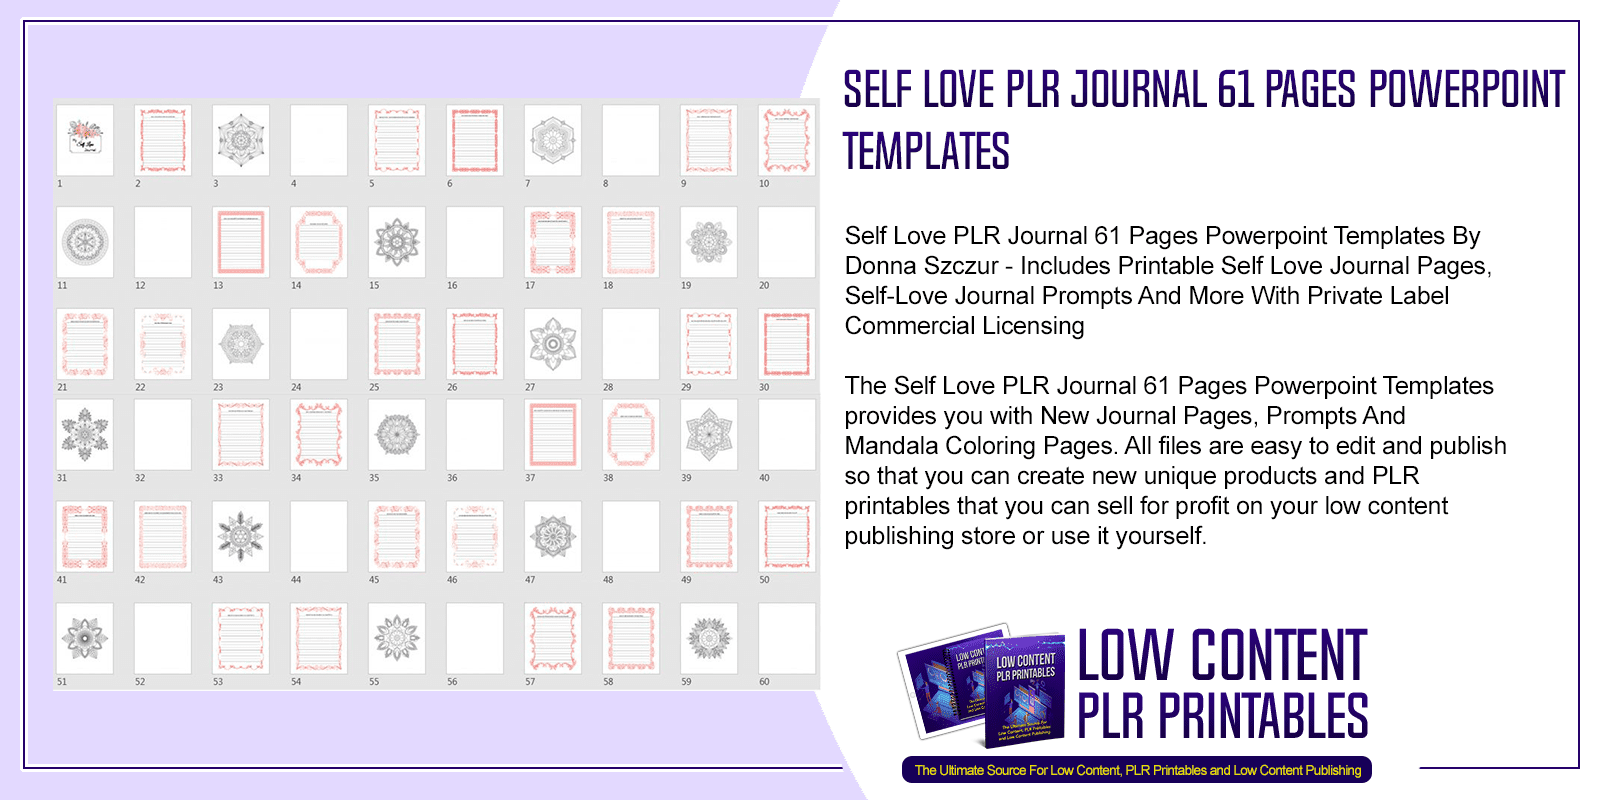 Self Love PLR Journal 61 Pages Powerpoint Templates